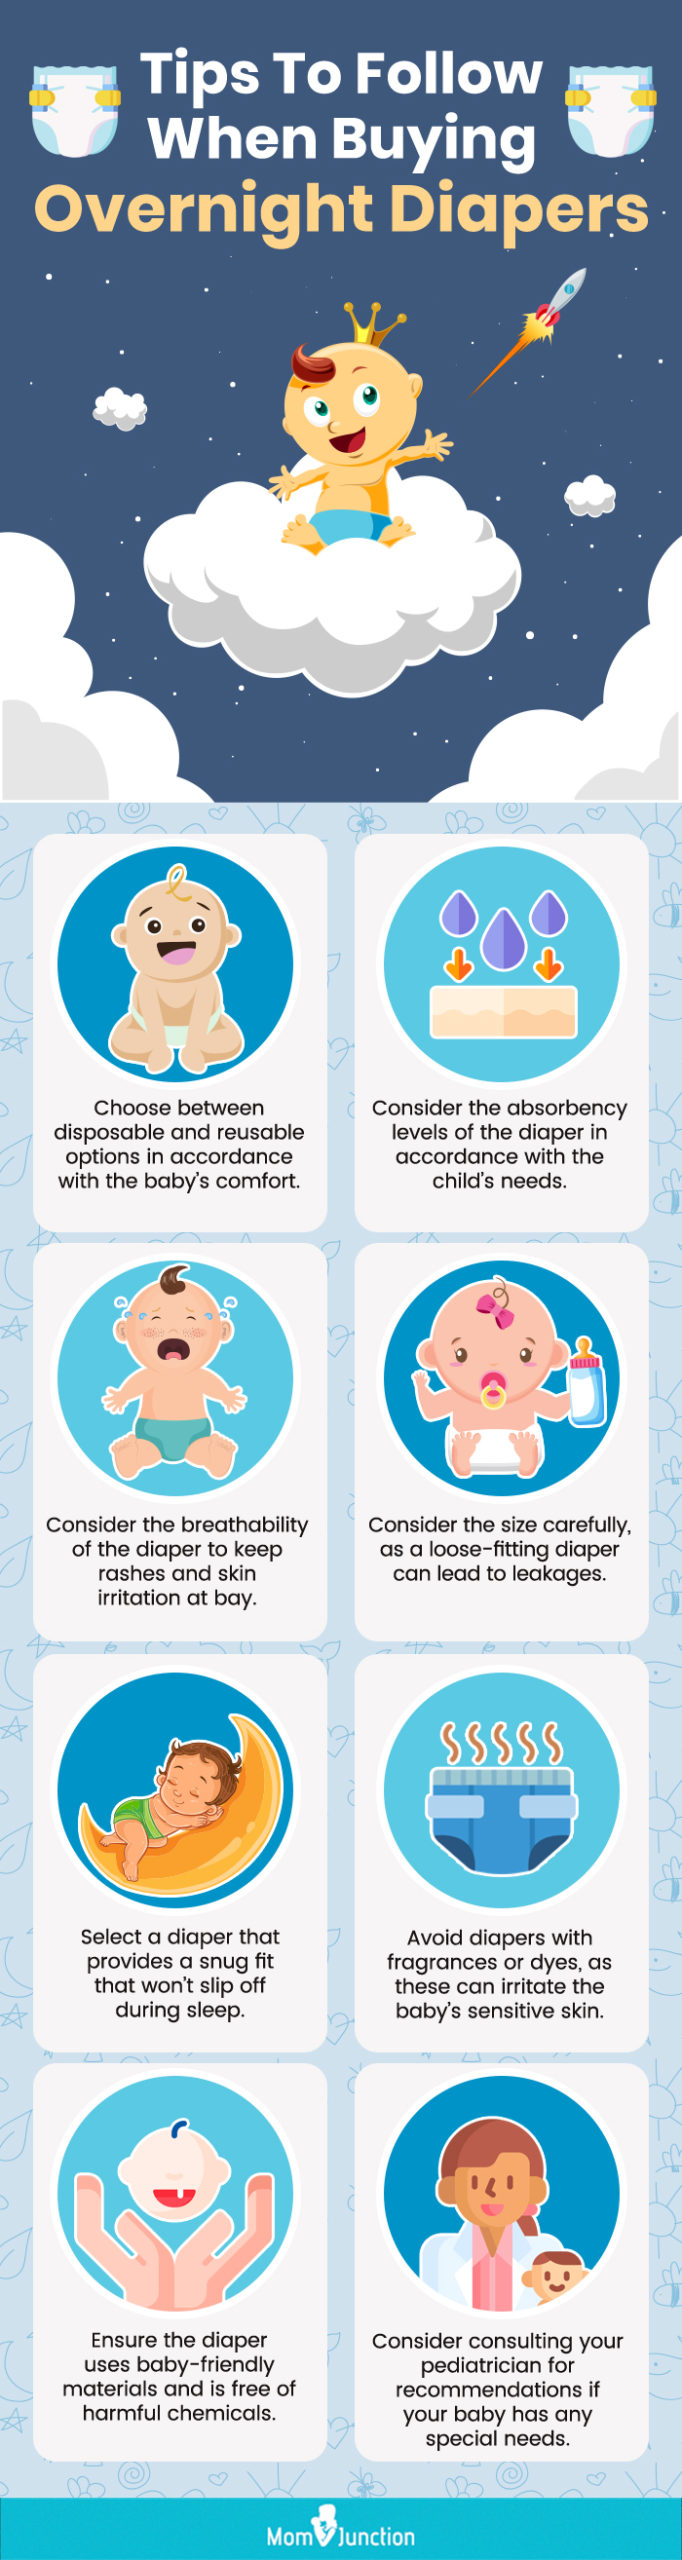 Tips To Follow When Buying Overnight Diapers (infographic)